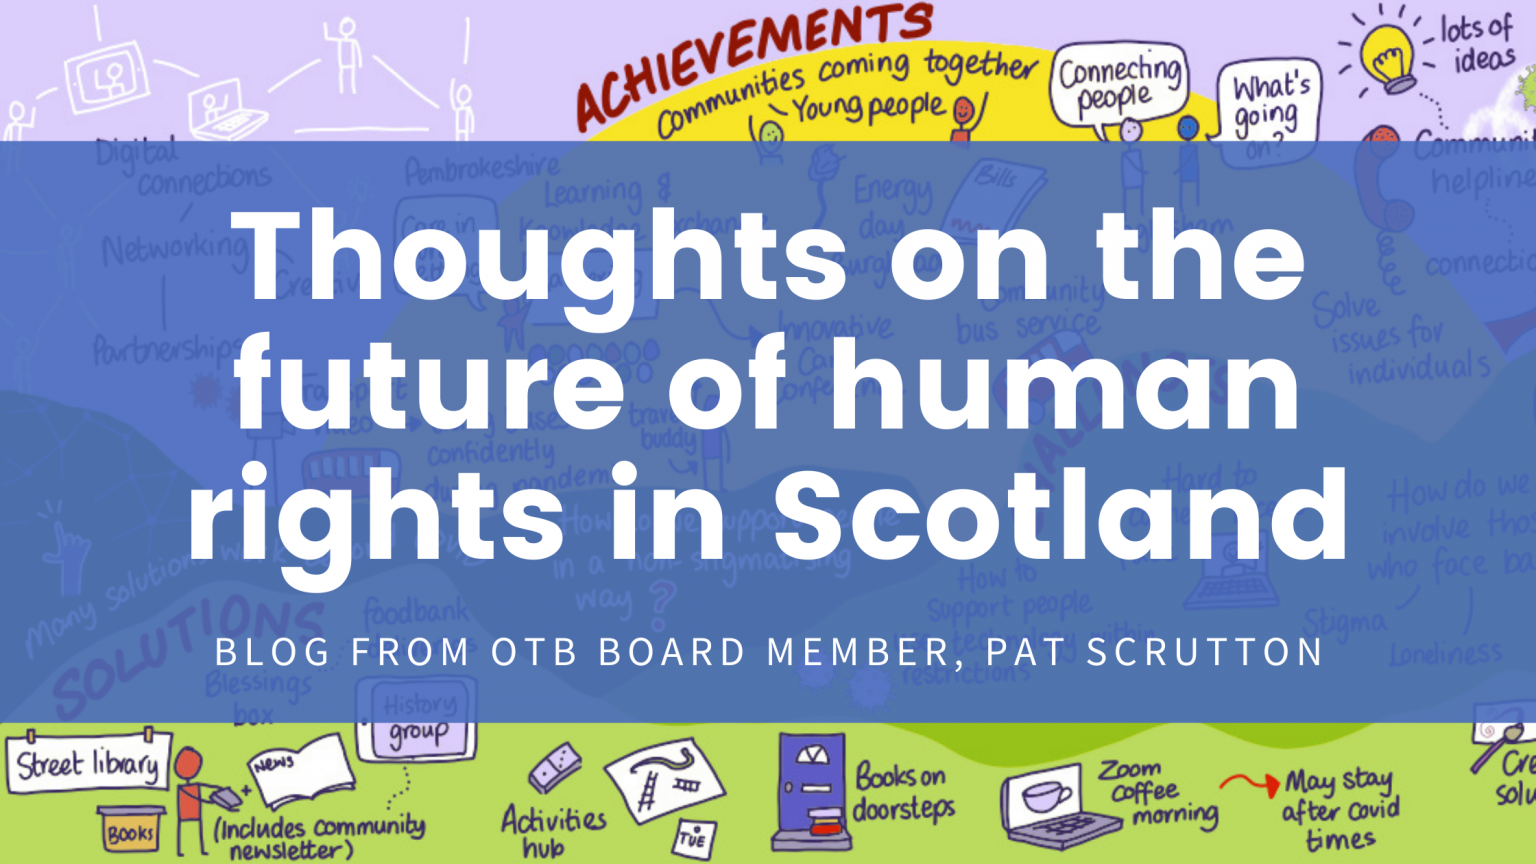 Thoughts on the future of human rights in Scotland - a blog from OTB board member, Pat Scrutton